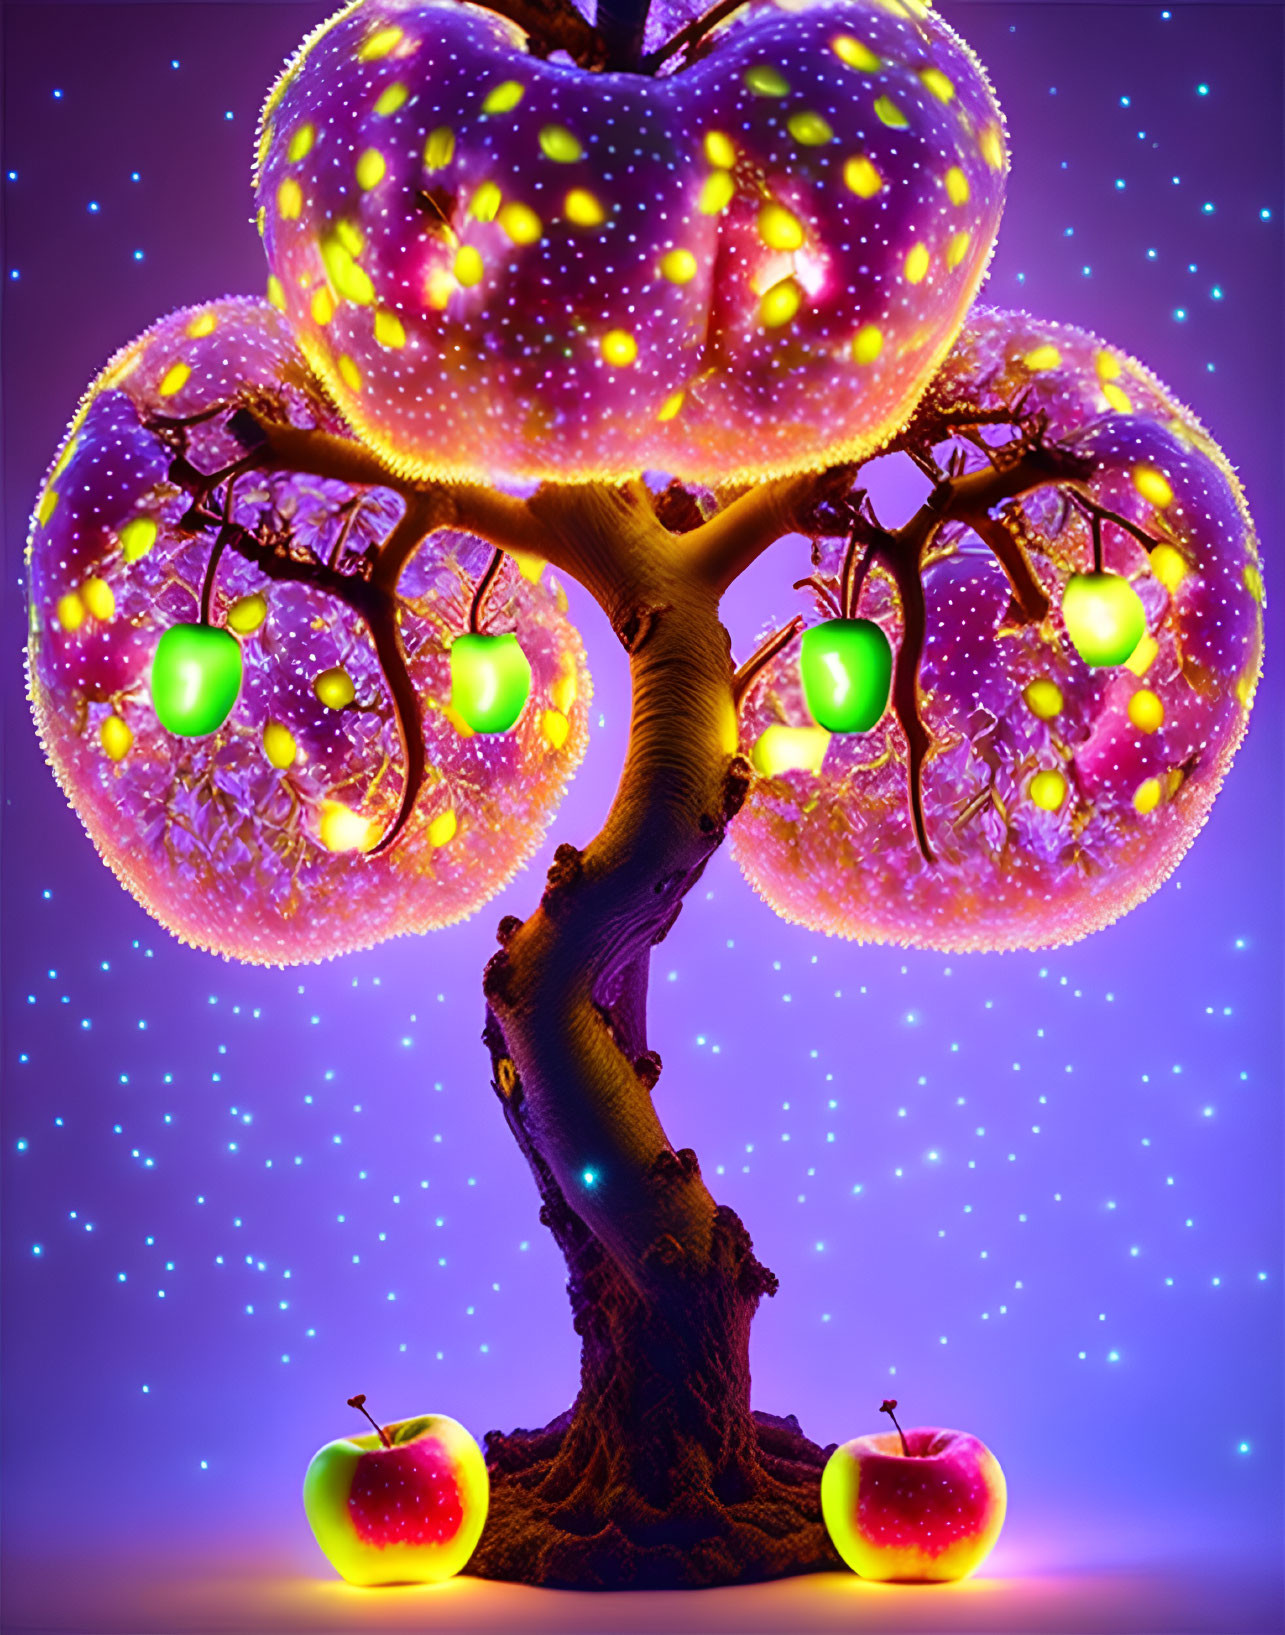 Magical glowing apple tree under starry sky with floating apples